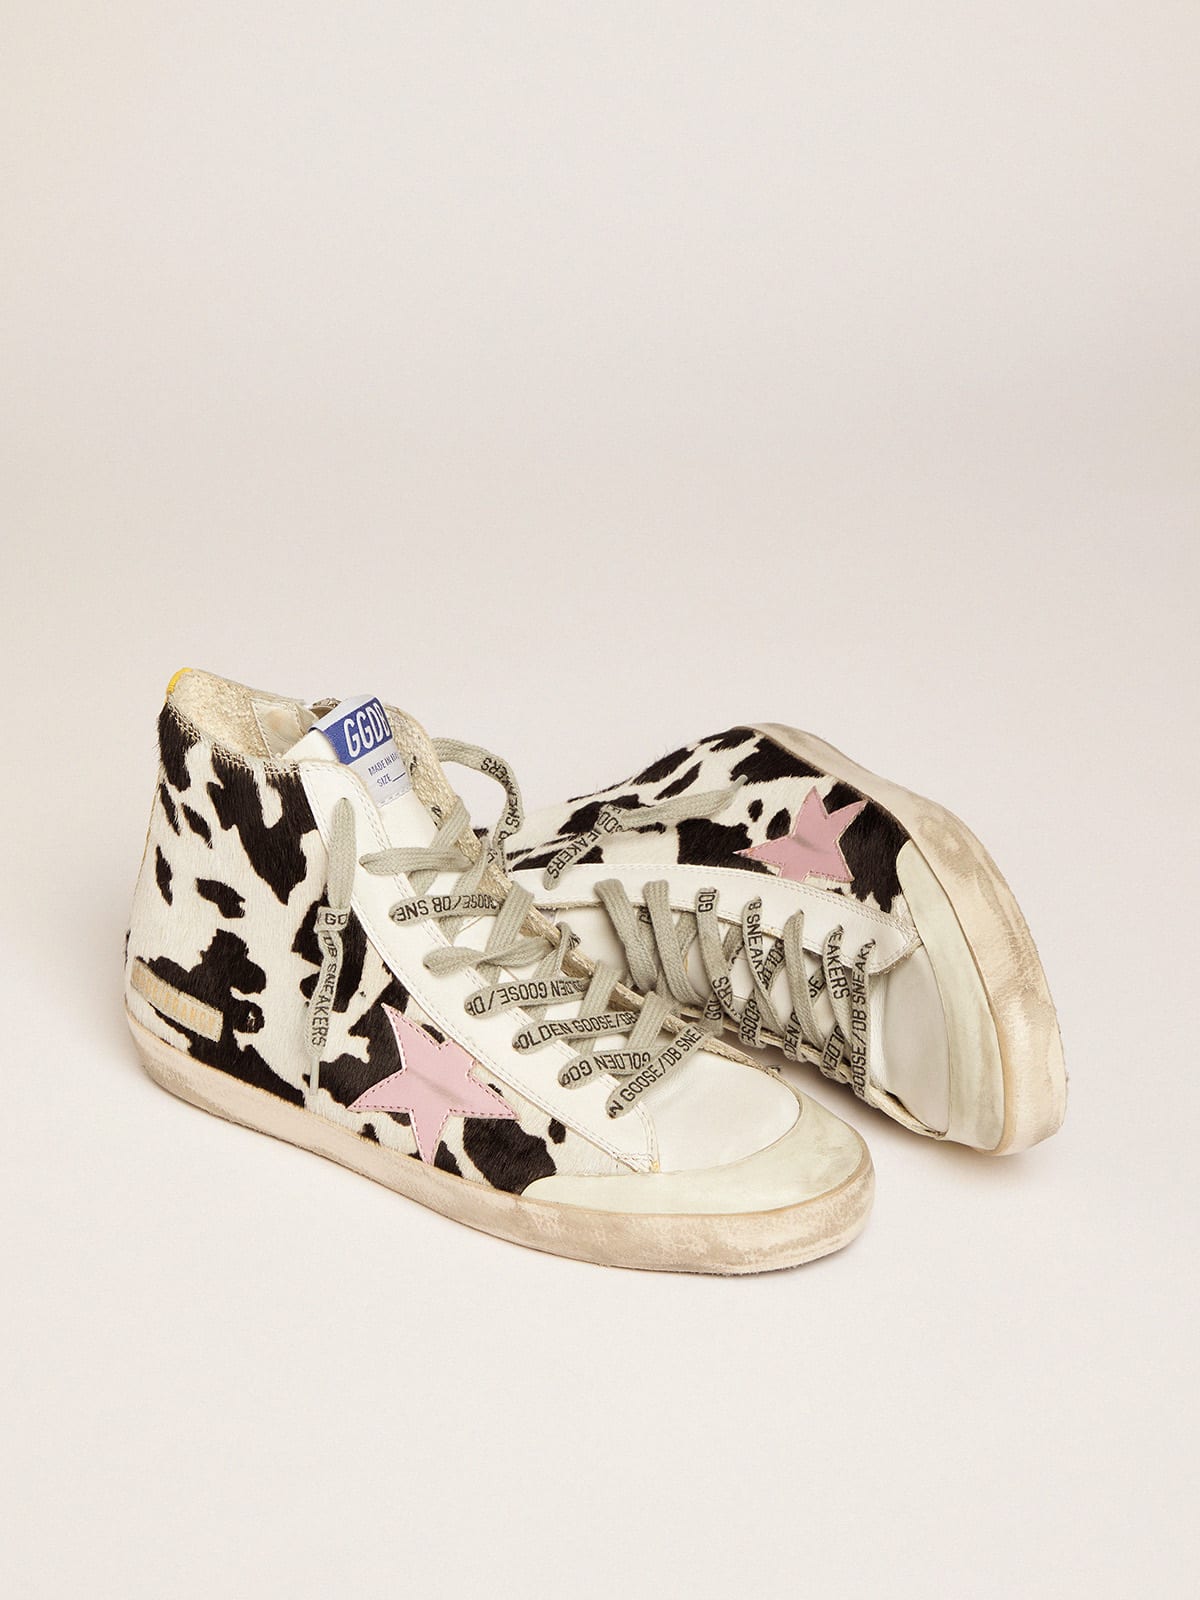 Golden Goose - Francy sneakers in cow-print pony skin with pink laminated leather star in 